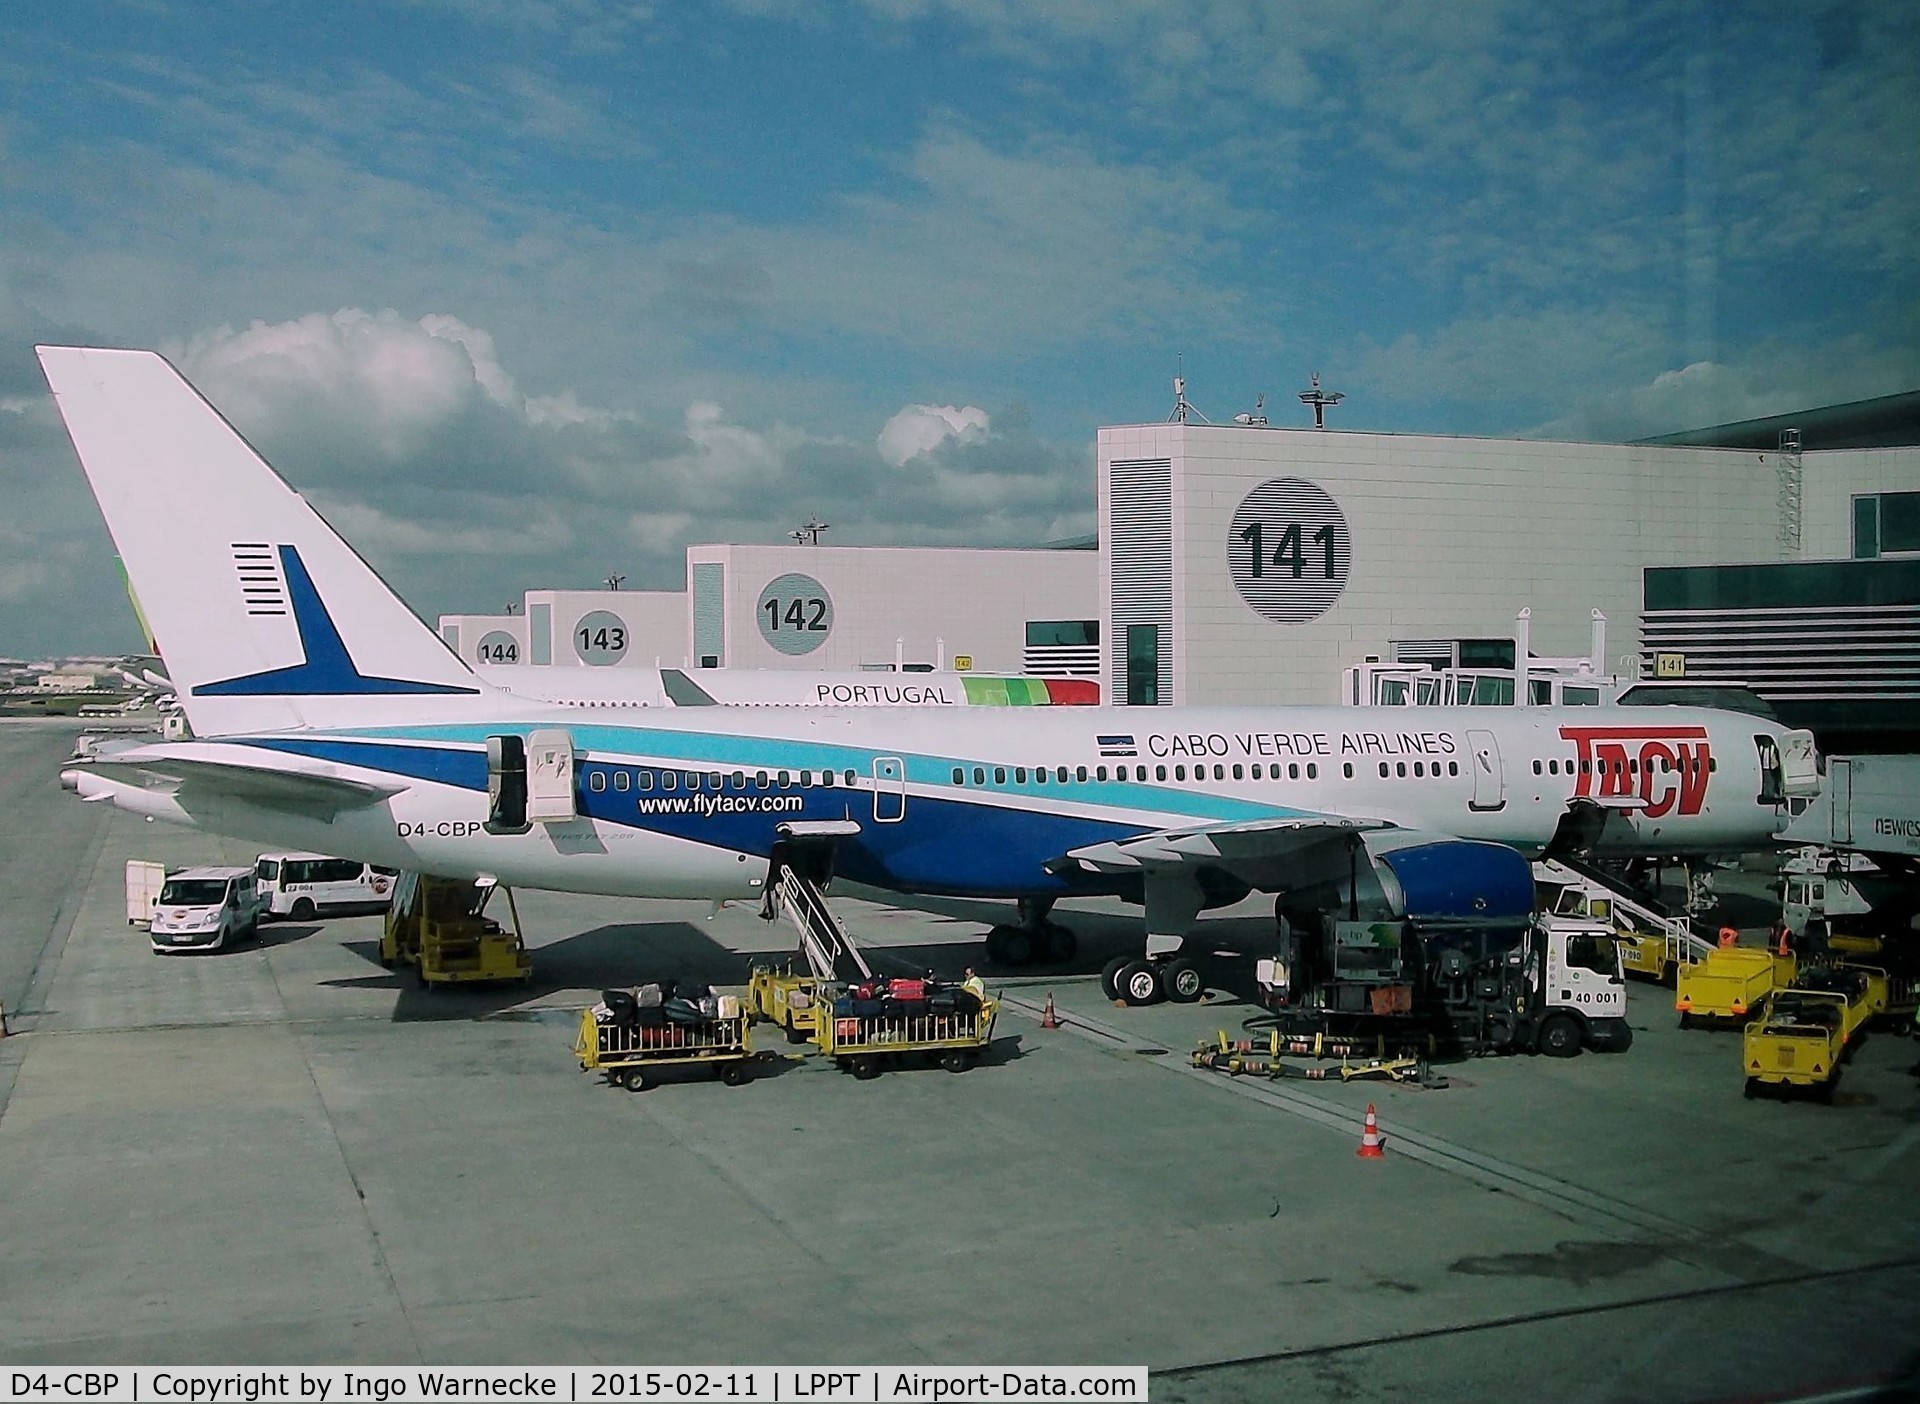 D4-CBP, 2001 Boeing 757-2Q8 C/N 30045, Boeing 757-2Q8 of TACV Cabo Verde Airlines at Lisbon airport